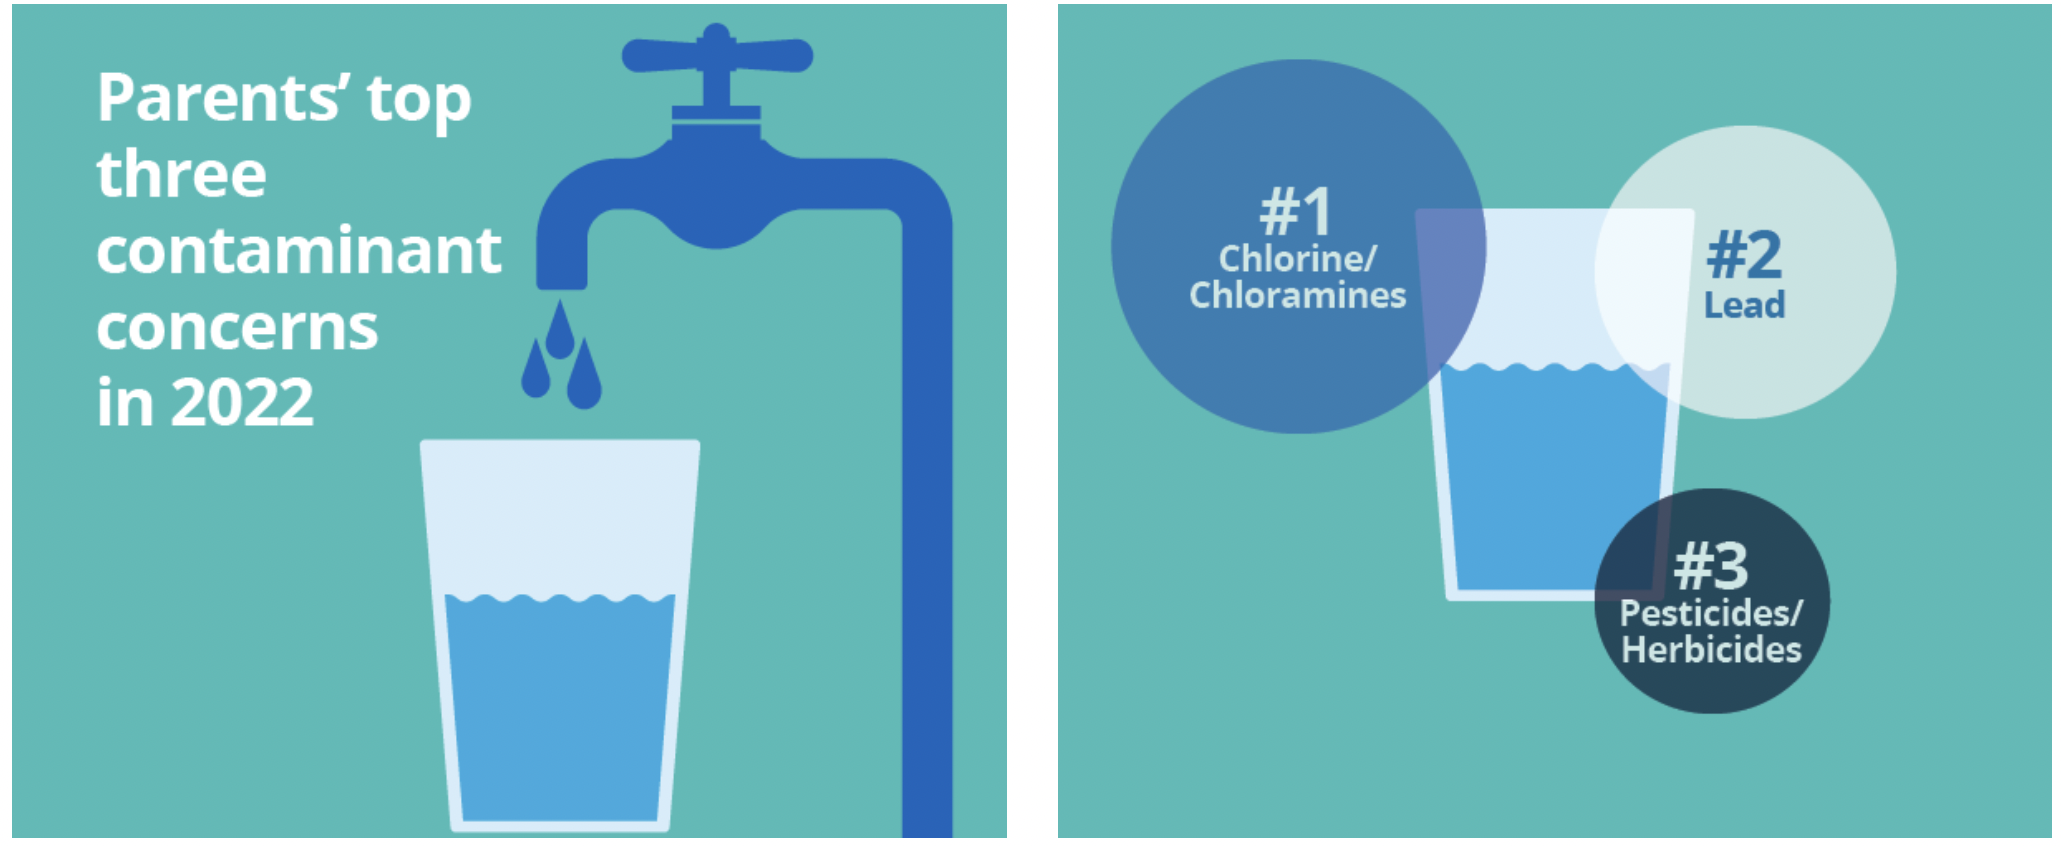 The top contaminants of concern for parents are chlorine/chloramines, lead, and pesticides/herbicides.